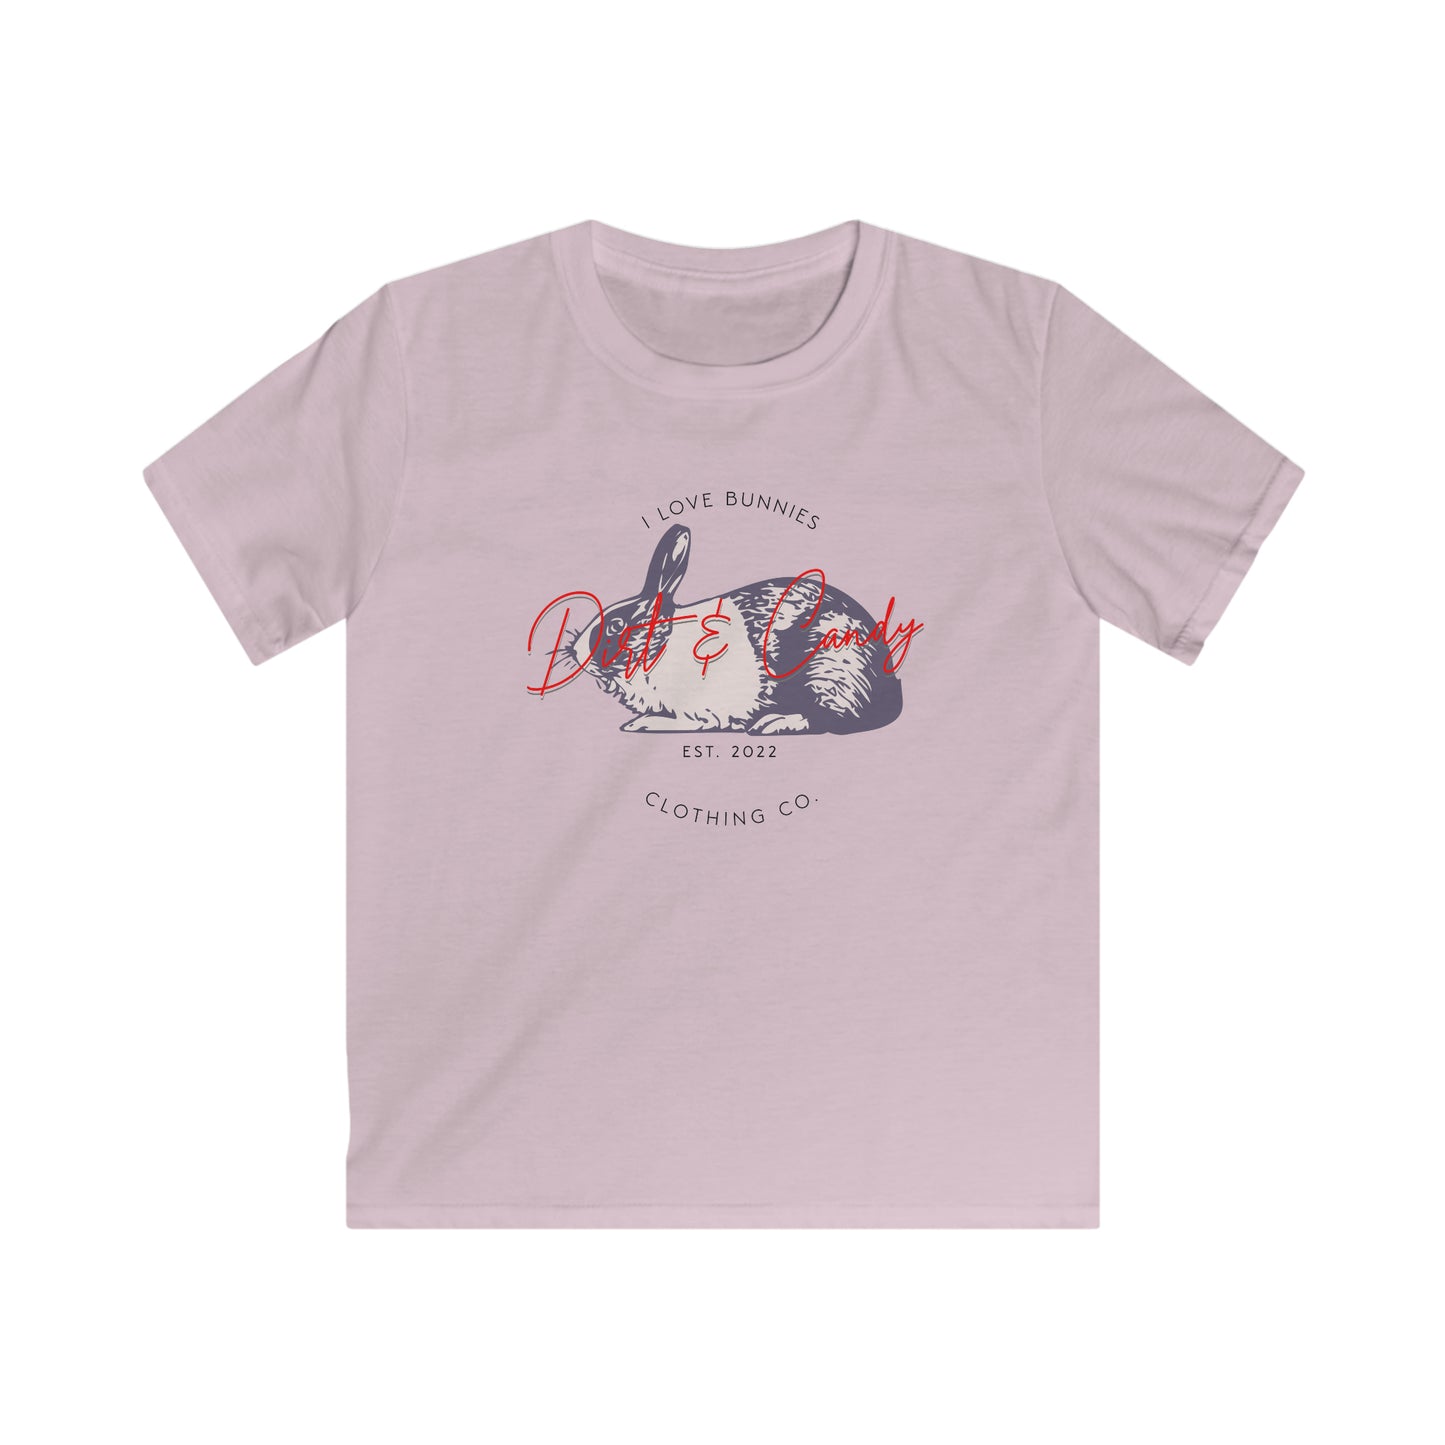 Bunny love: The perfect t-shirt for bunny and animal loving-kids.